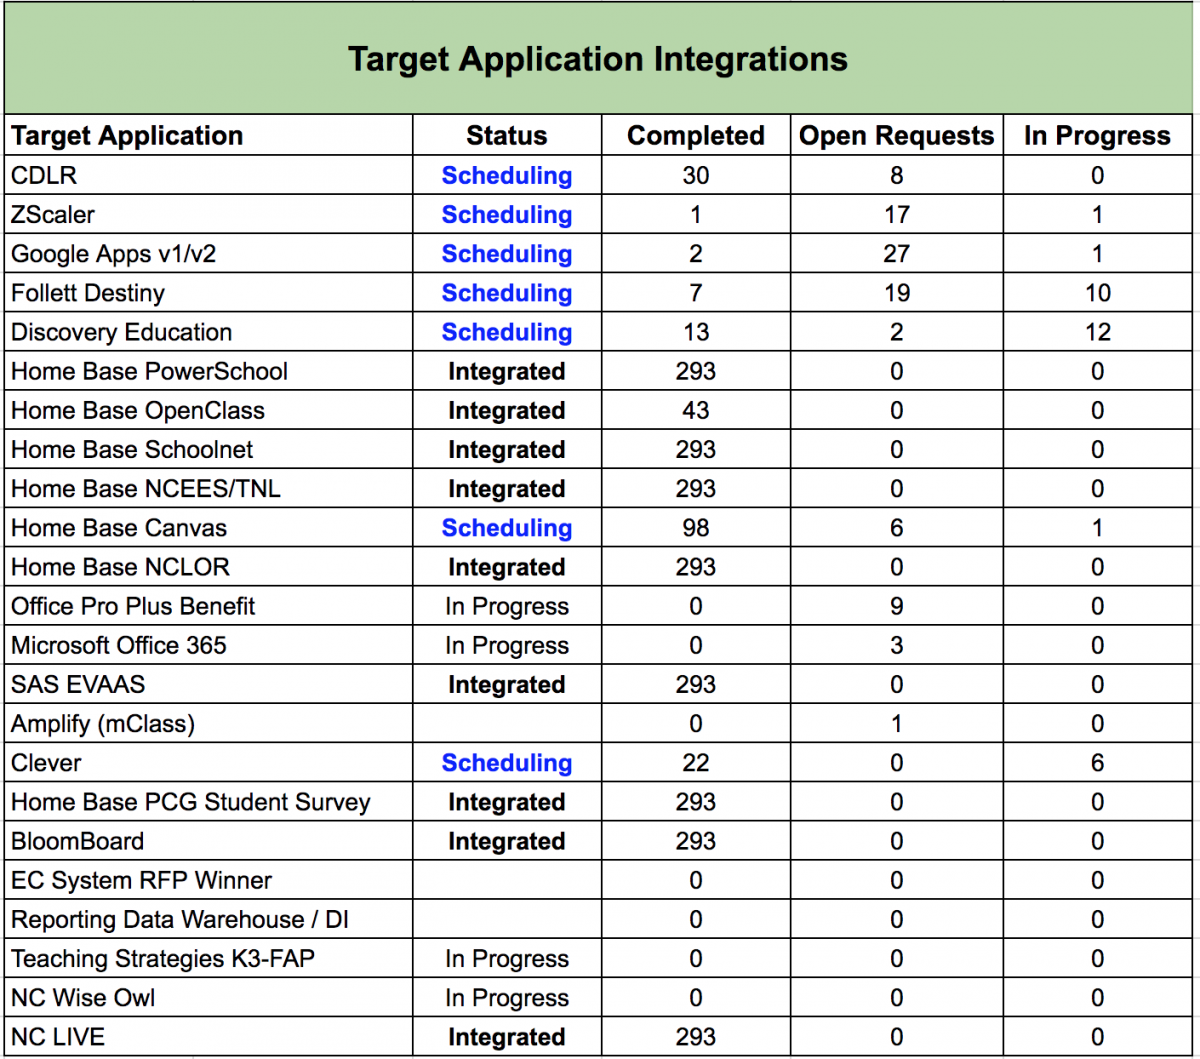 Count of Target Application Integrated